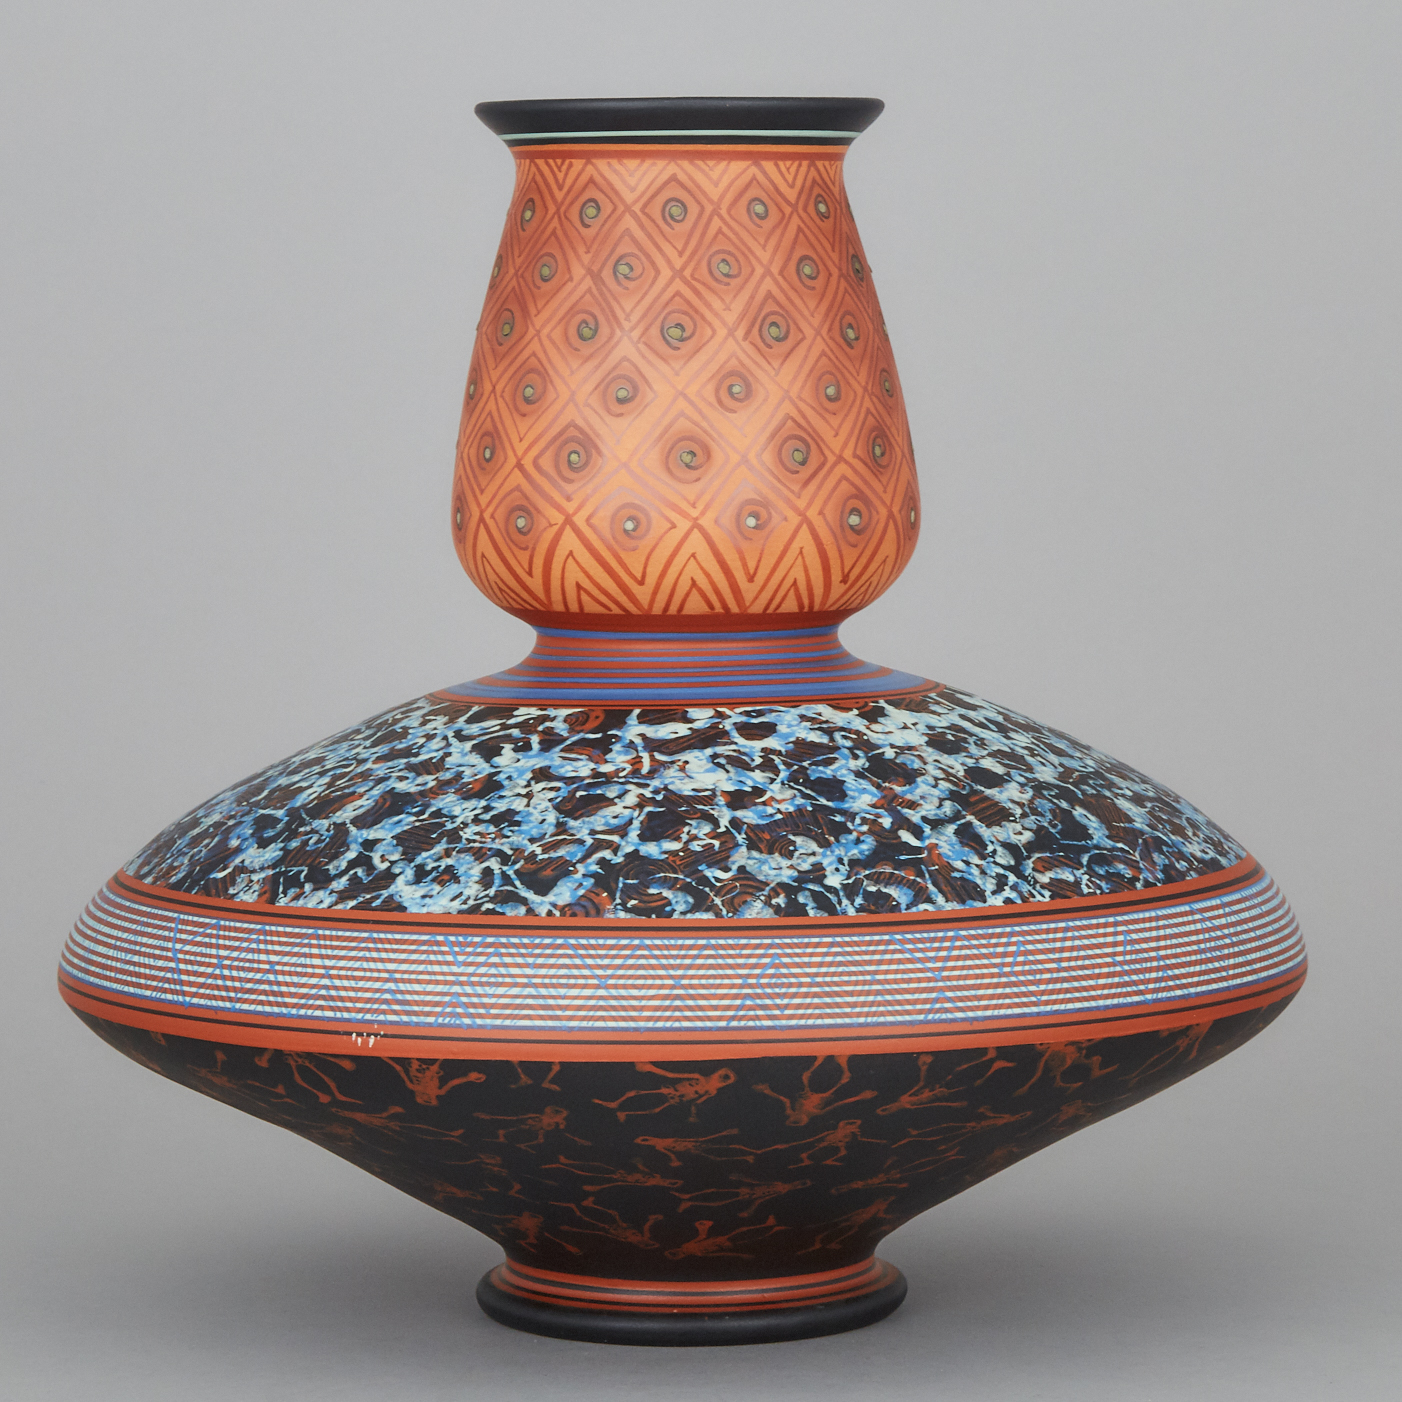 Greg Payce (Canadian, b.1956), Top-Shaped Vase, 1993